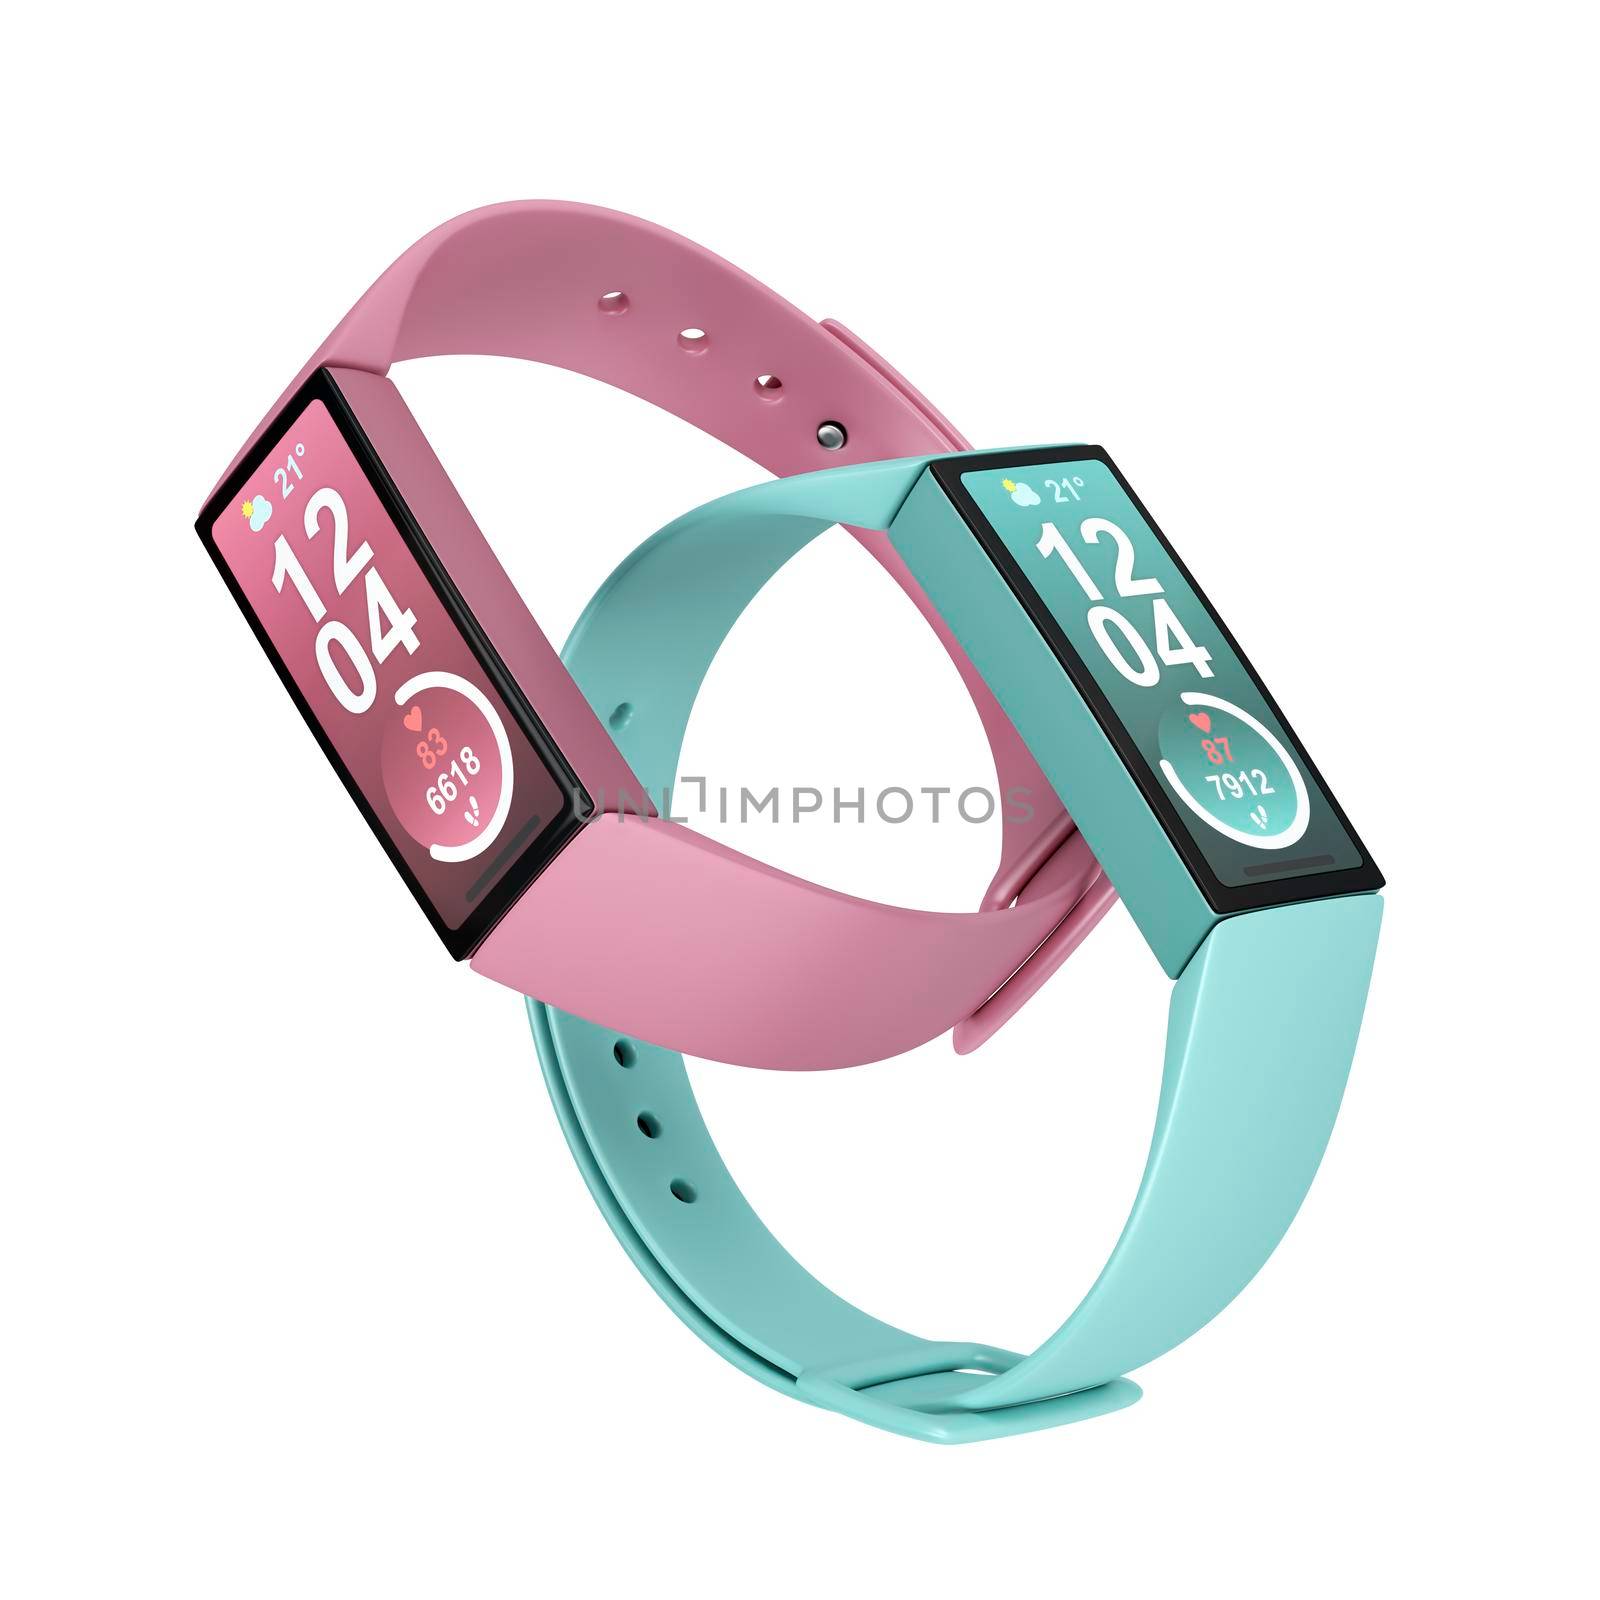 Two fitness trackers by magraphics